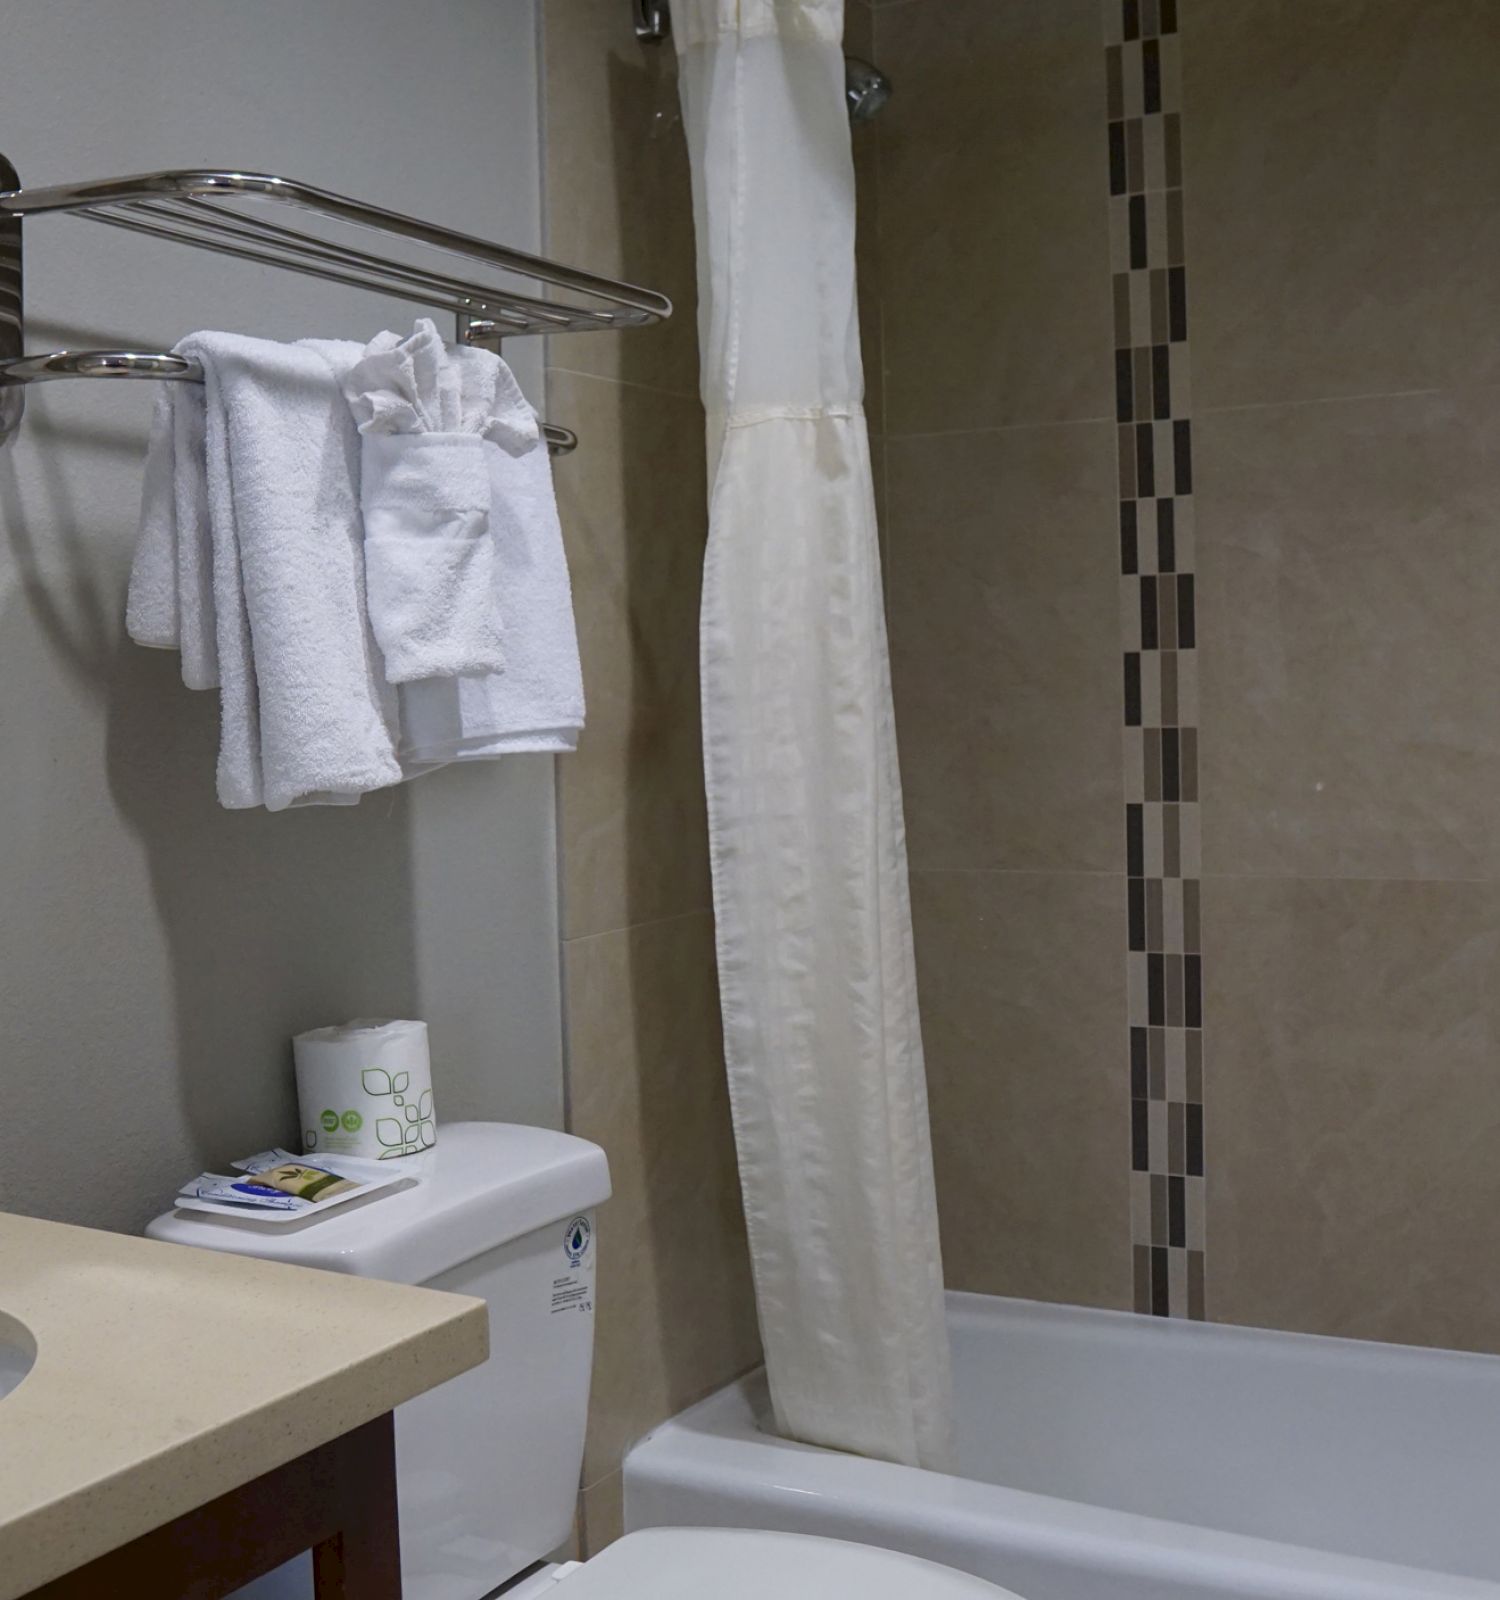 This image shows a clean bathroom with a sink, a mirror, a towel rack with white towels, a toilet, and a bathtub with a shower curtain drawn.